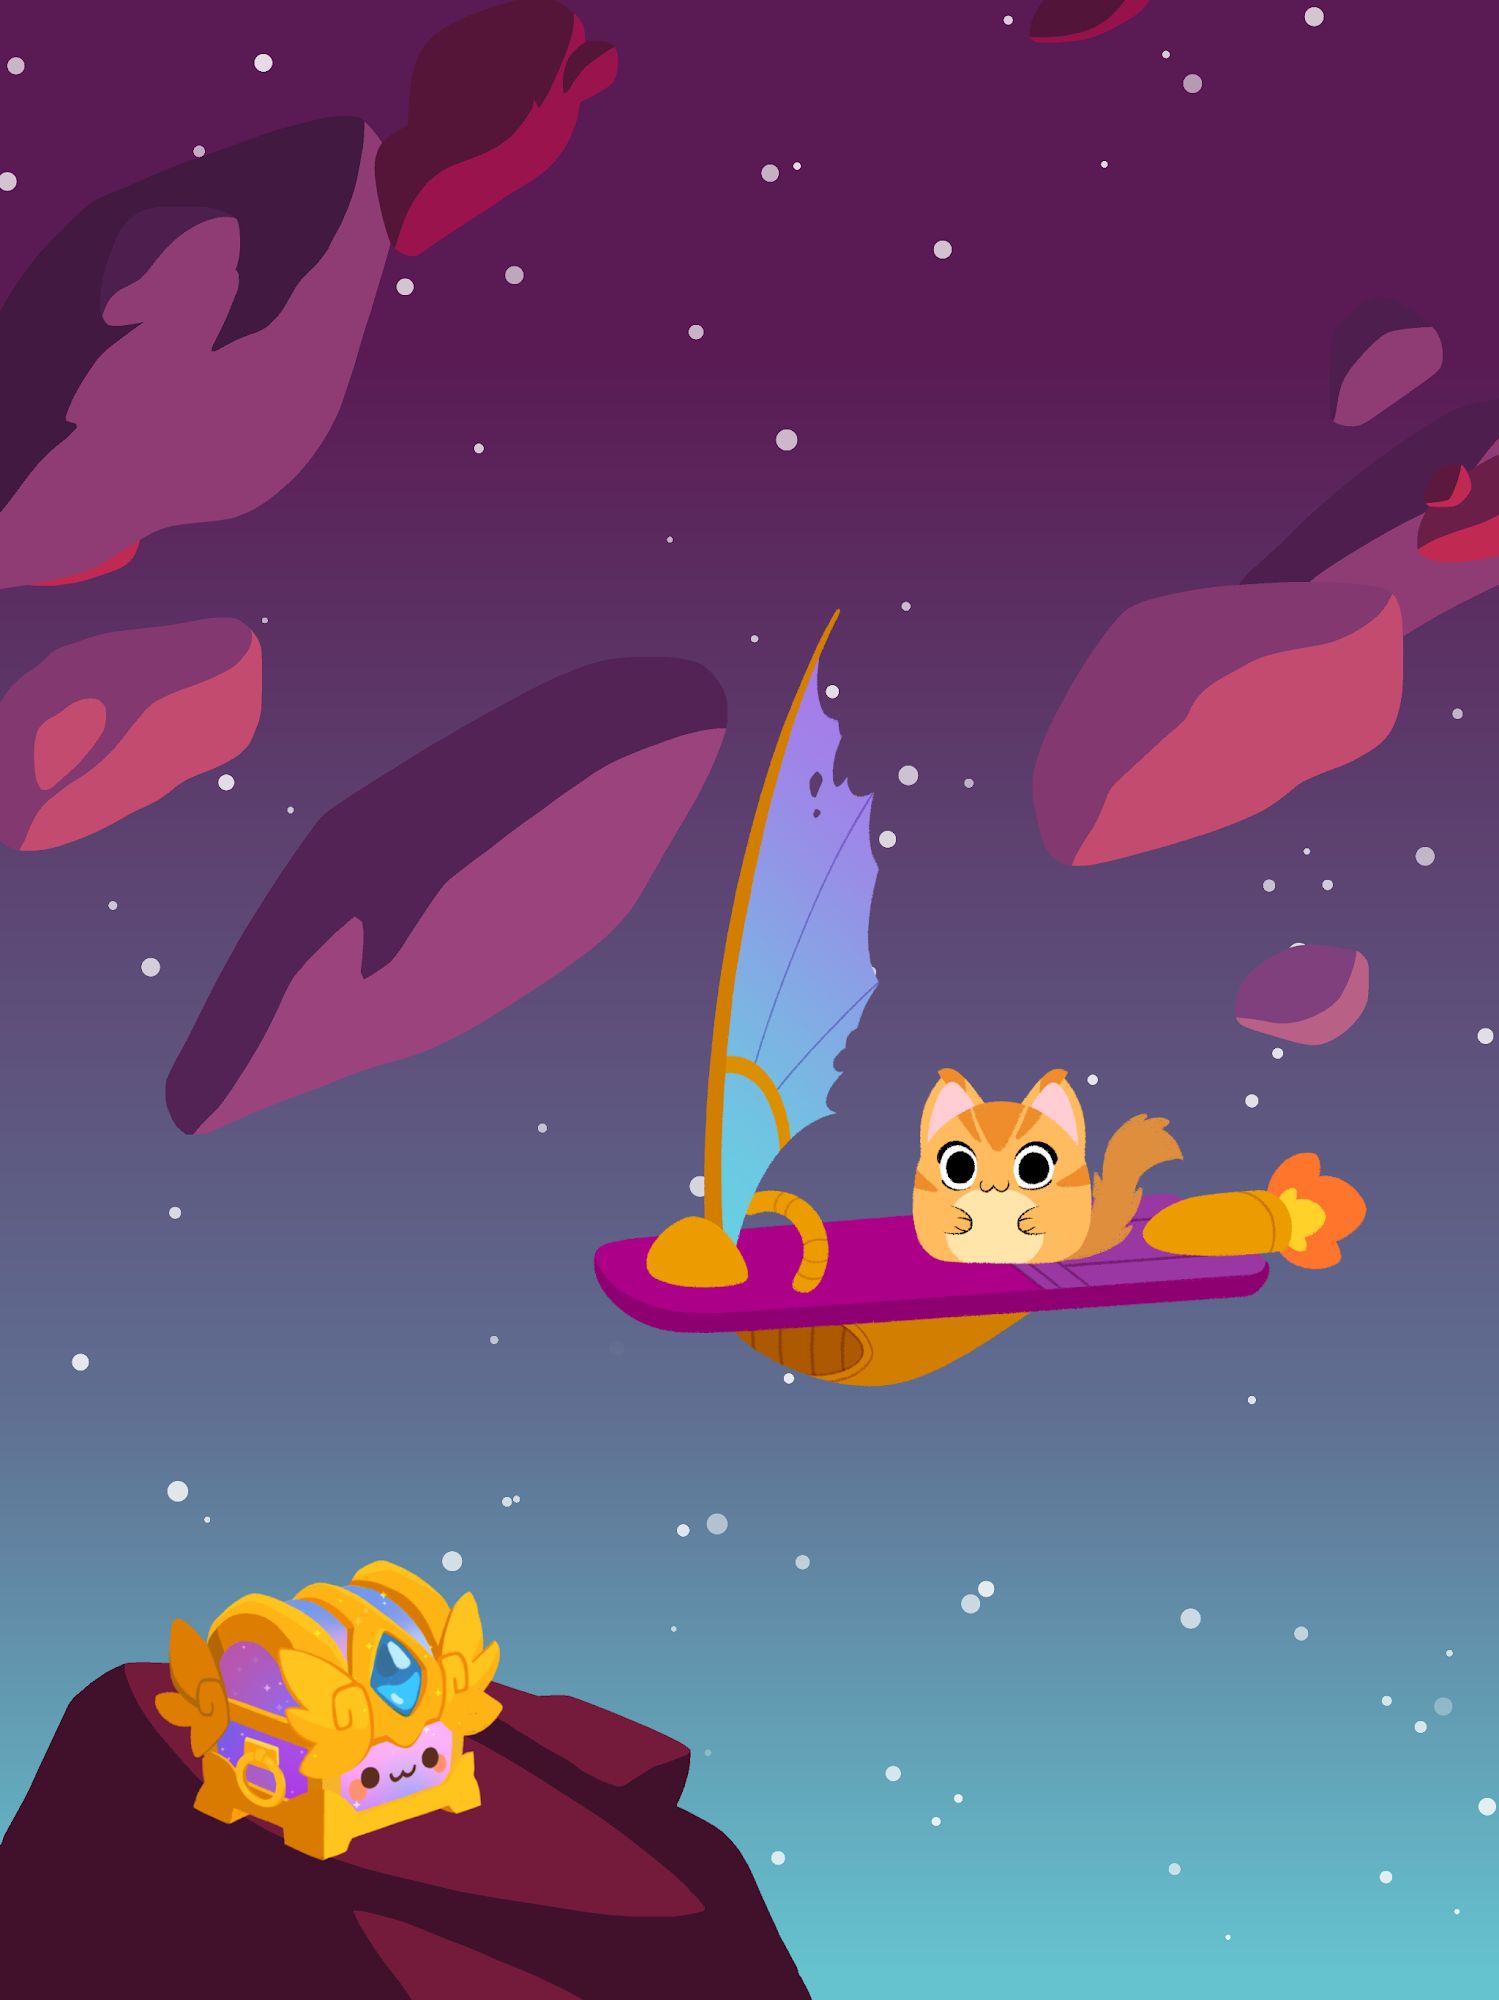 Scarica Sailor Cats 2: Space Odyssey gratis per Android.